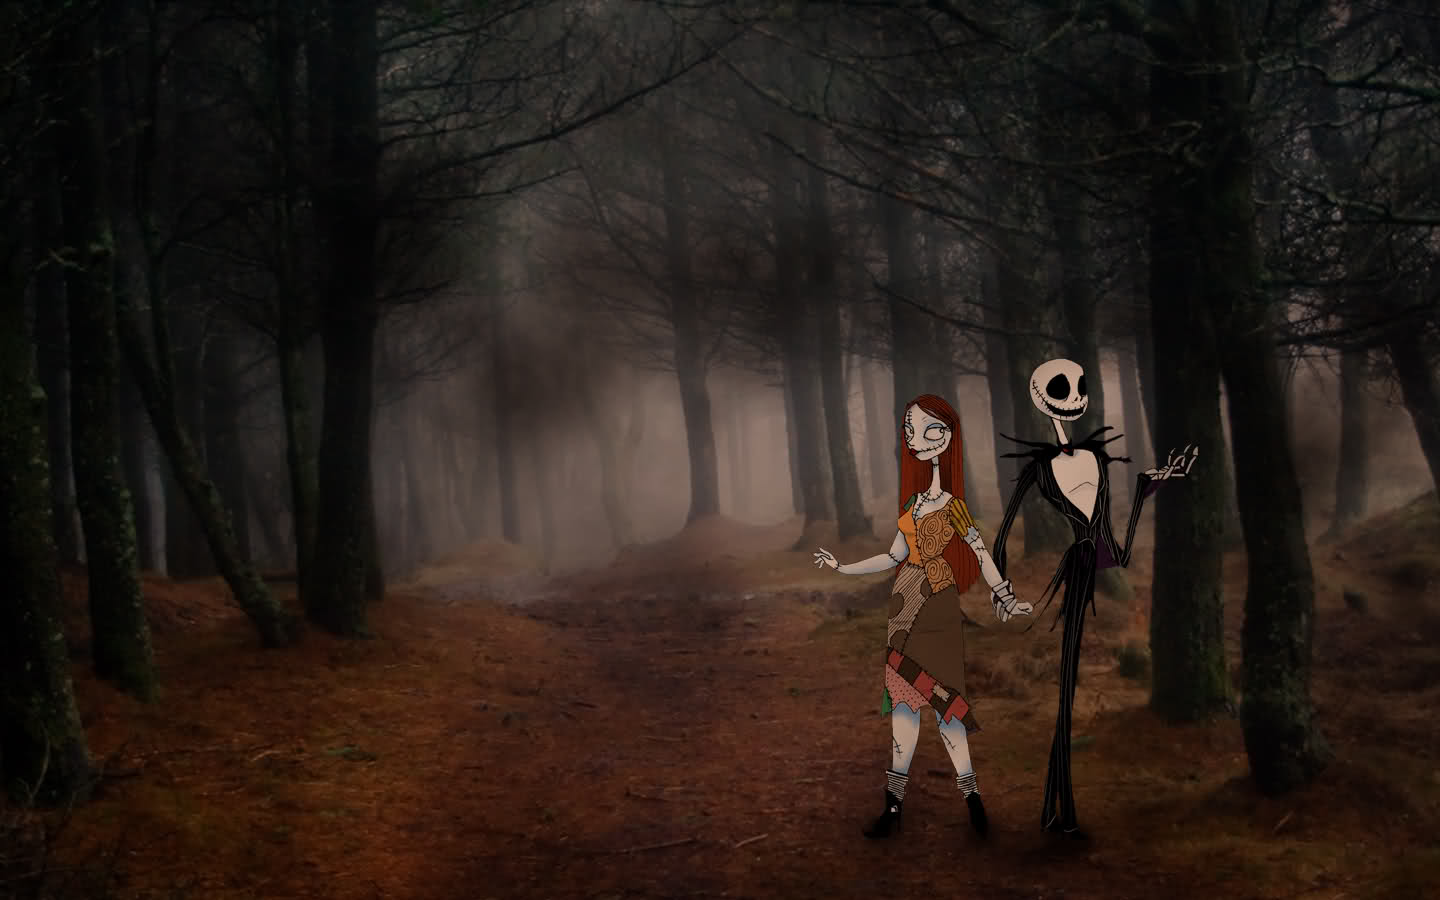 Jack And Sally Wallpapers.